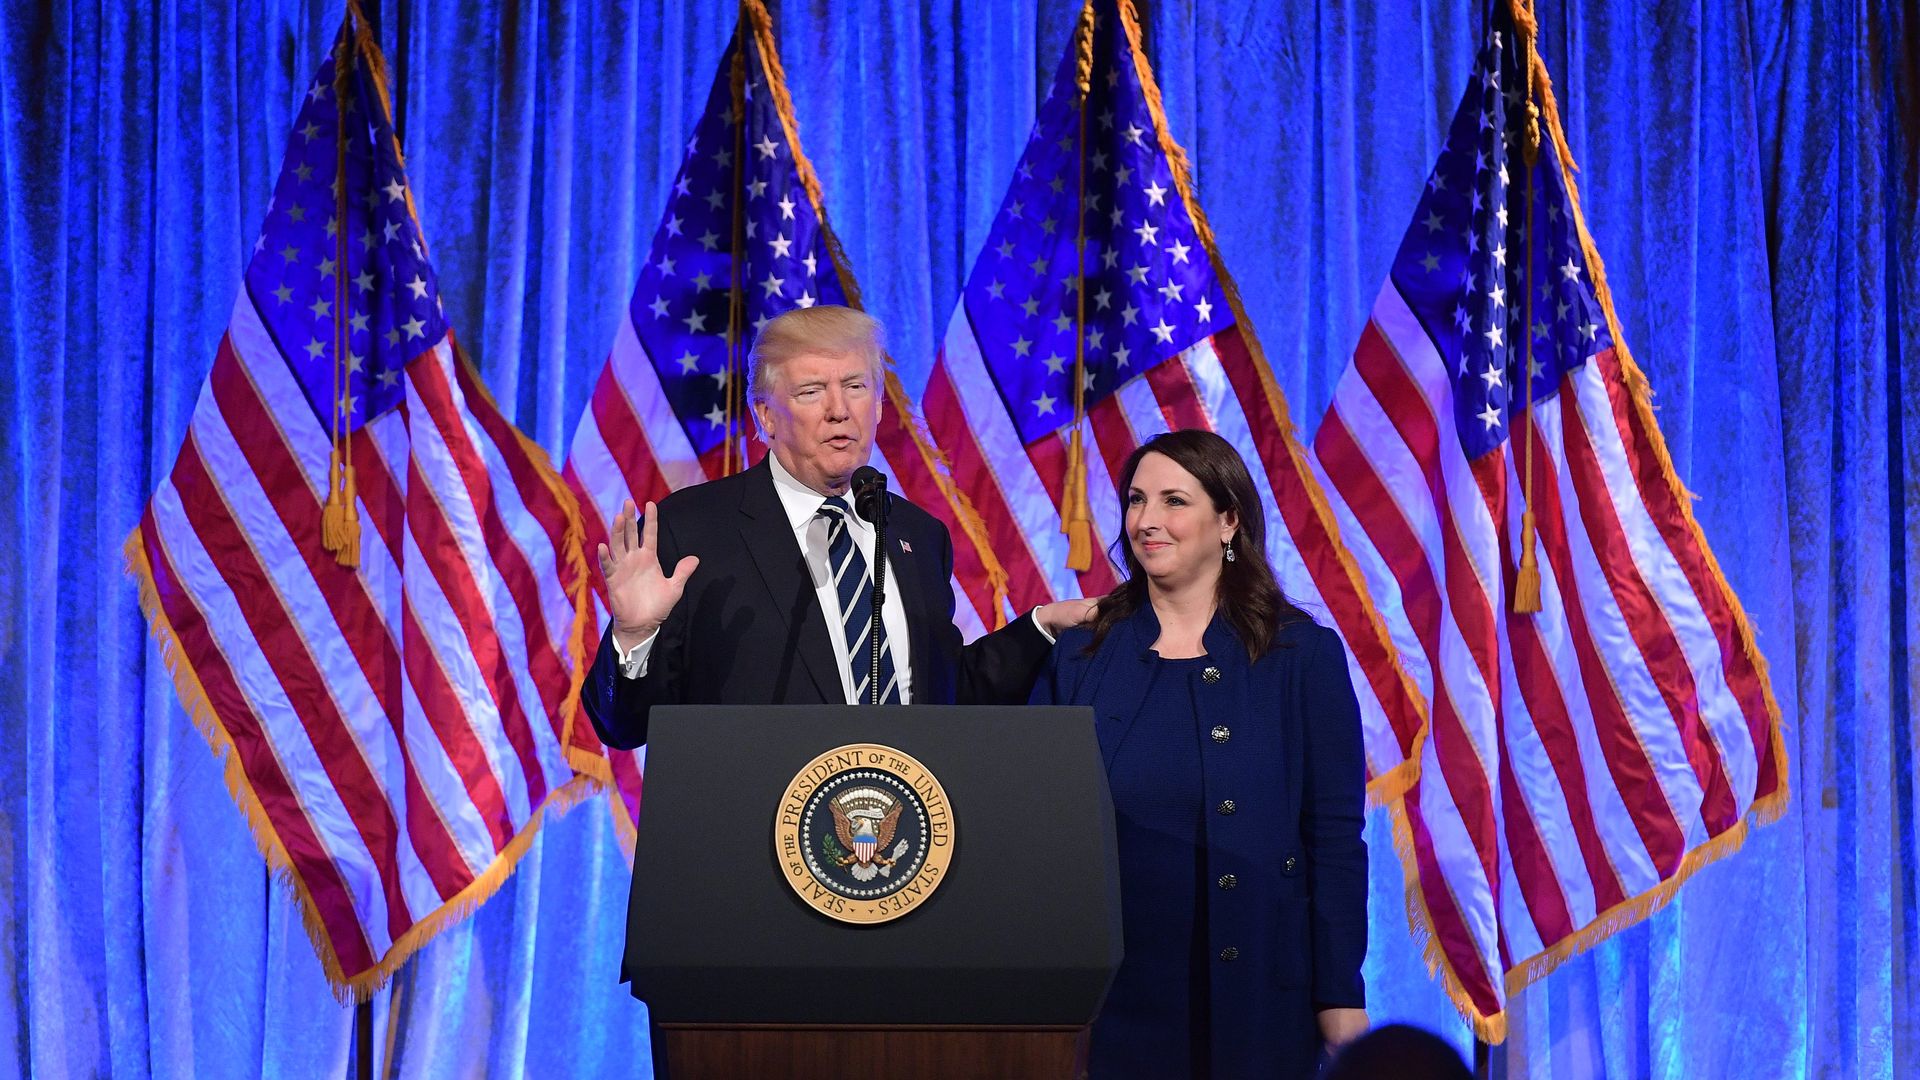 President Donald Trump speaks after his introduction by RNC Chairwoman Ronna Romney McDaniel at a fundraising breakfast in a restaurant in New York, New York on December 2